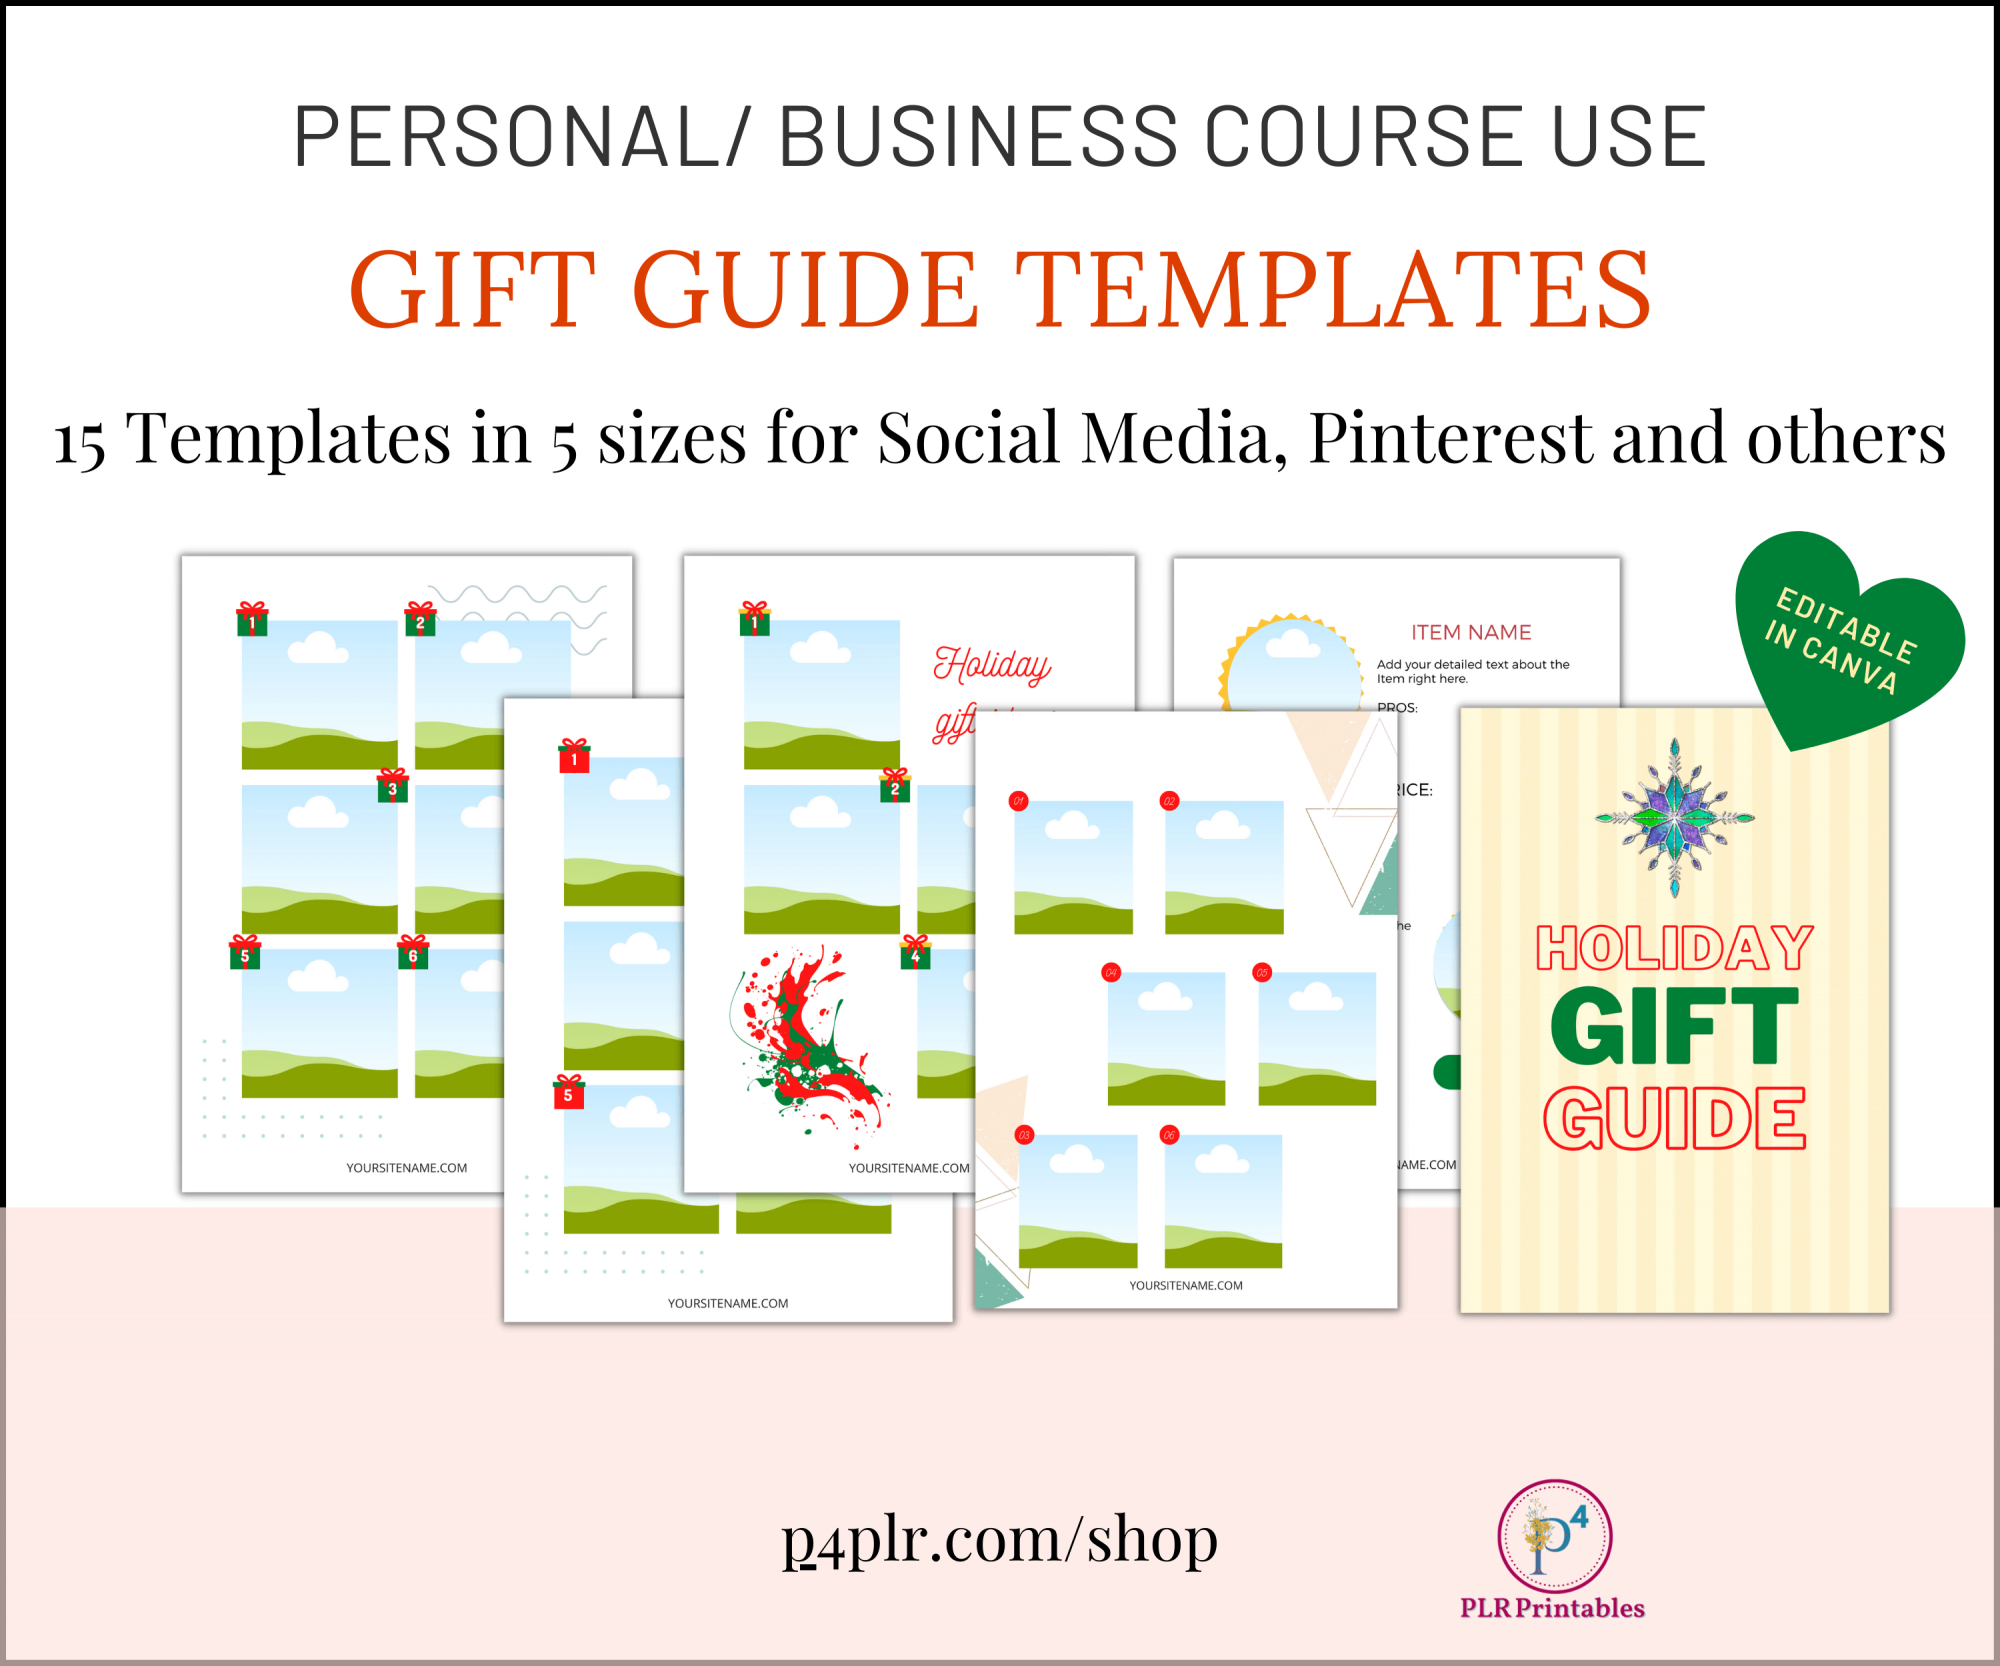 NEW! Gift Guide Templates for Blog and Coaches